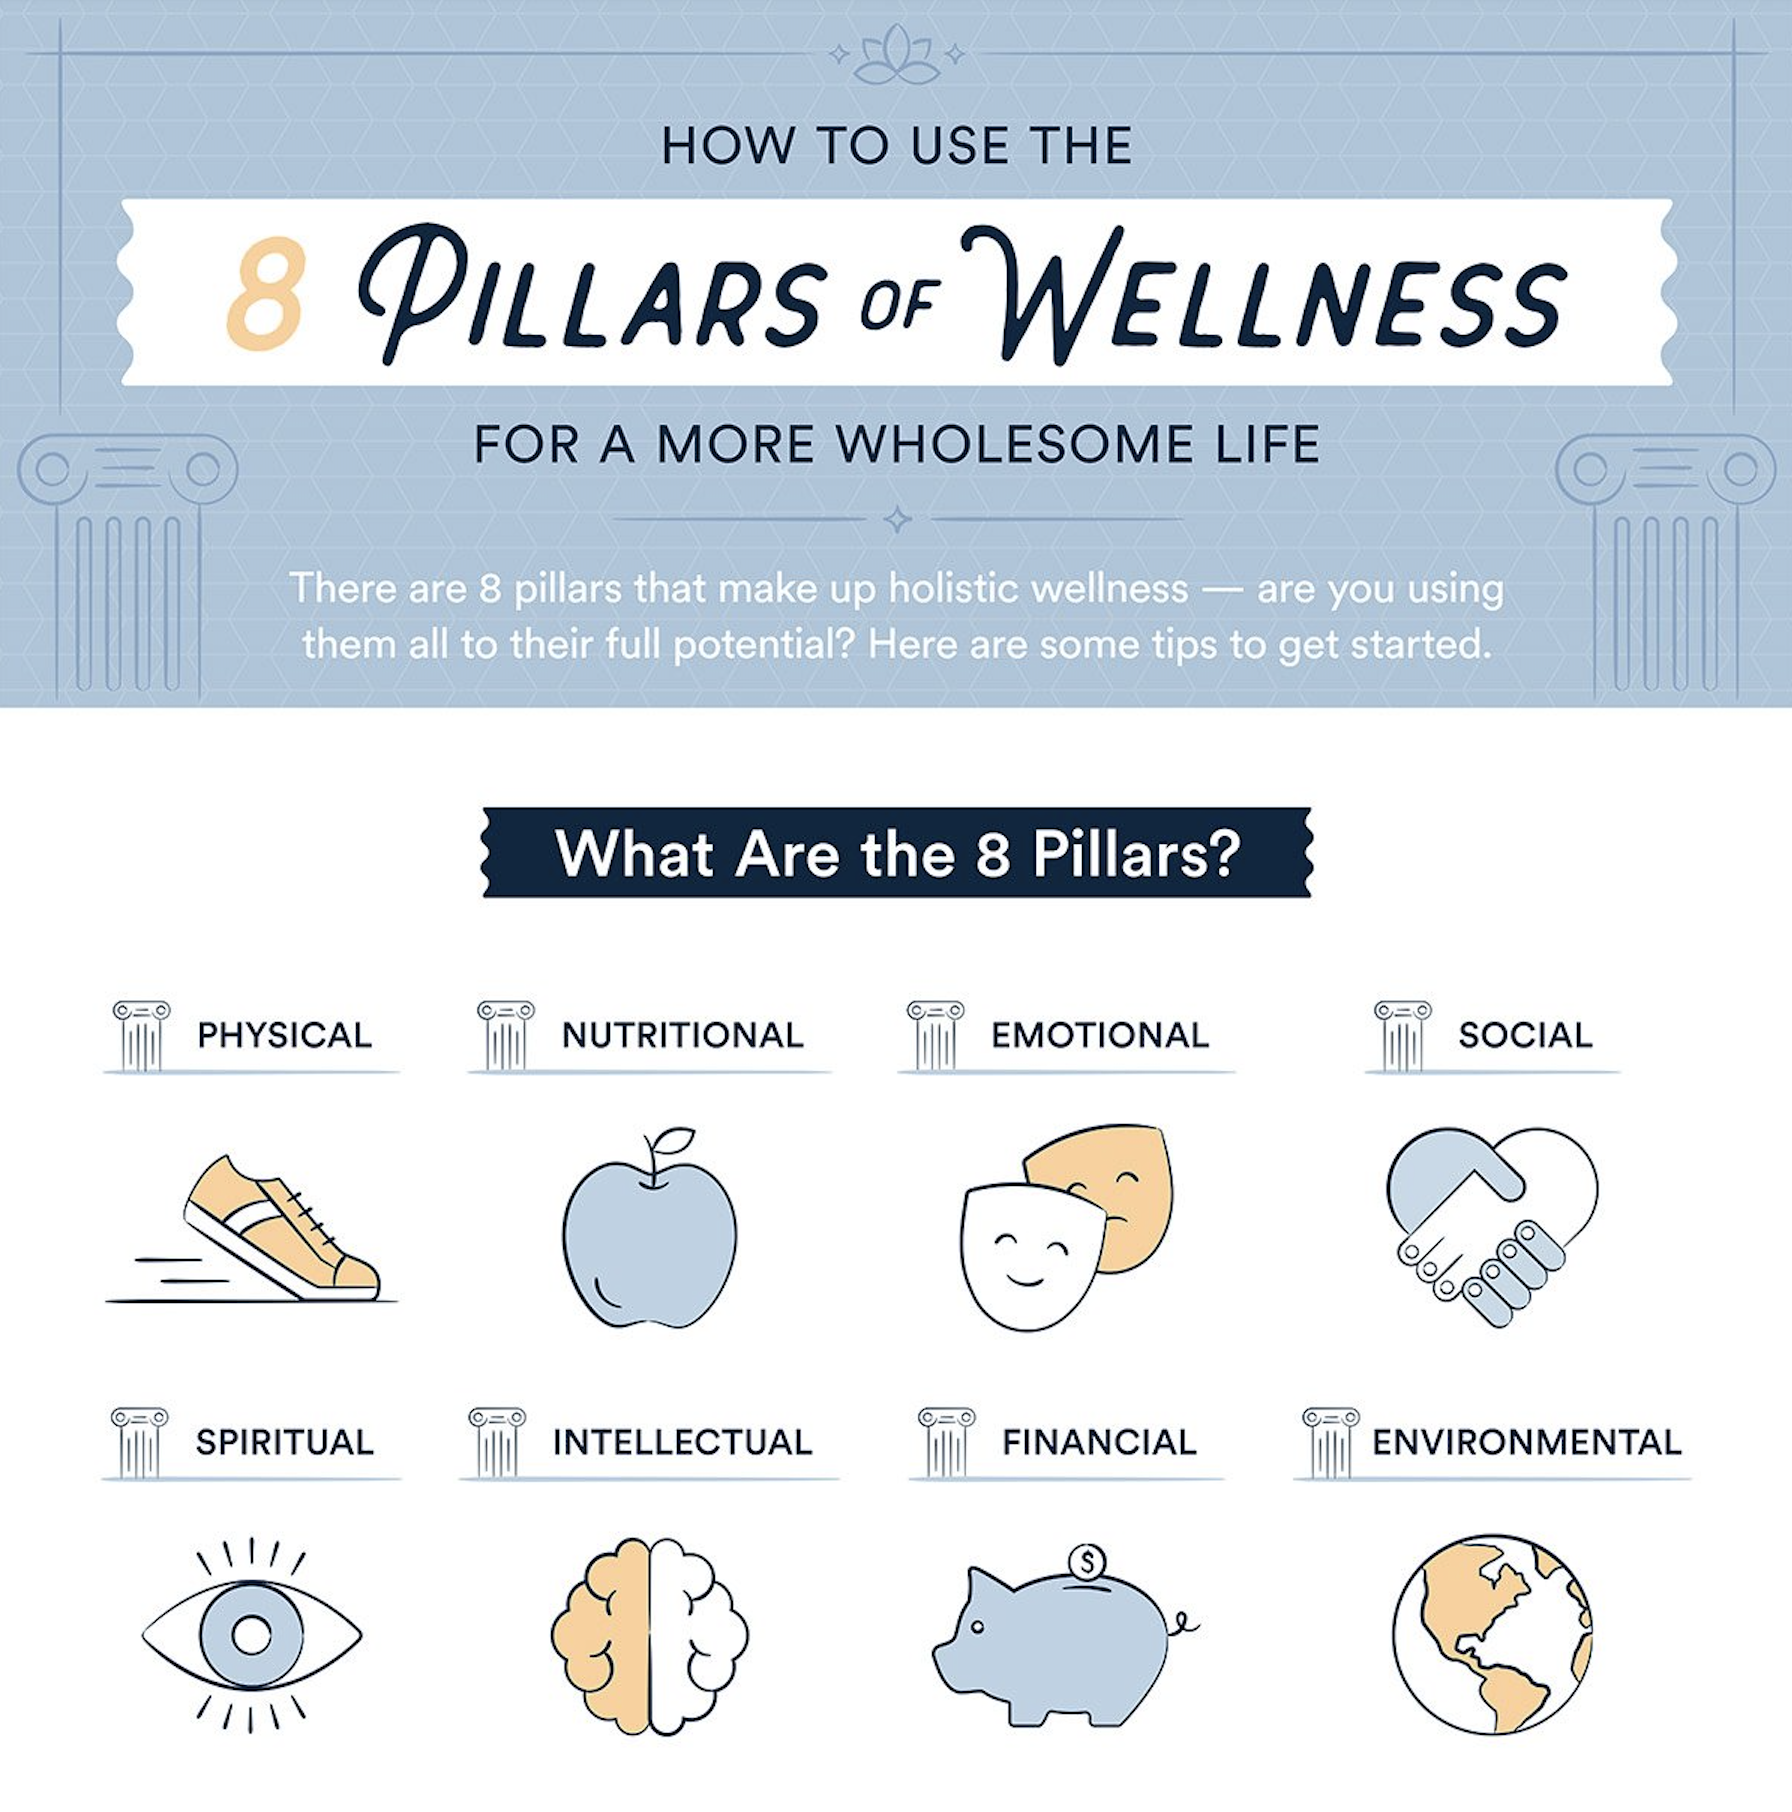 Click through to find out more about the 8 pillars of wellness with tips to get started today!